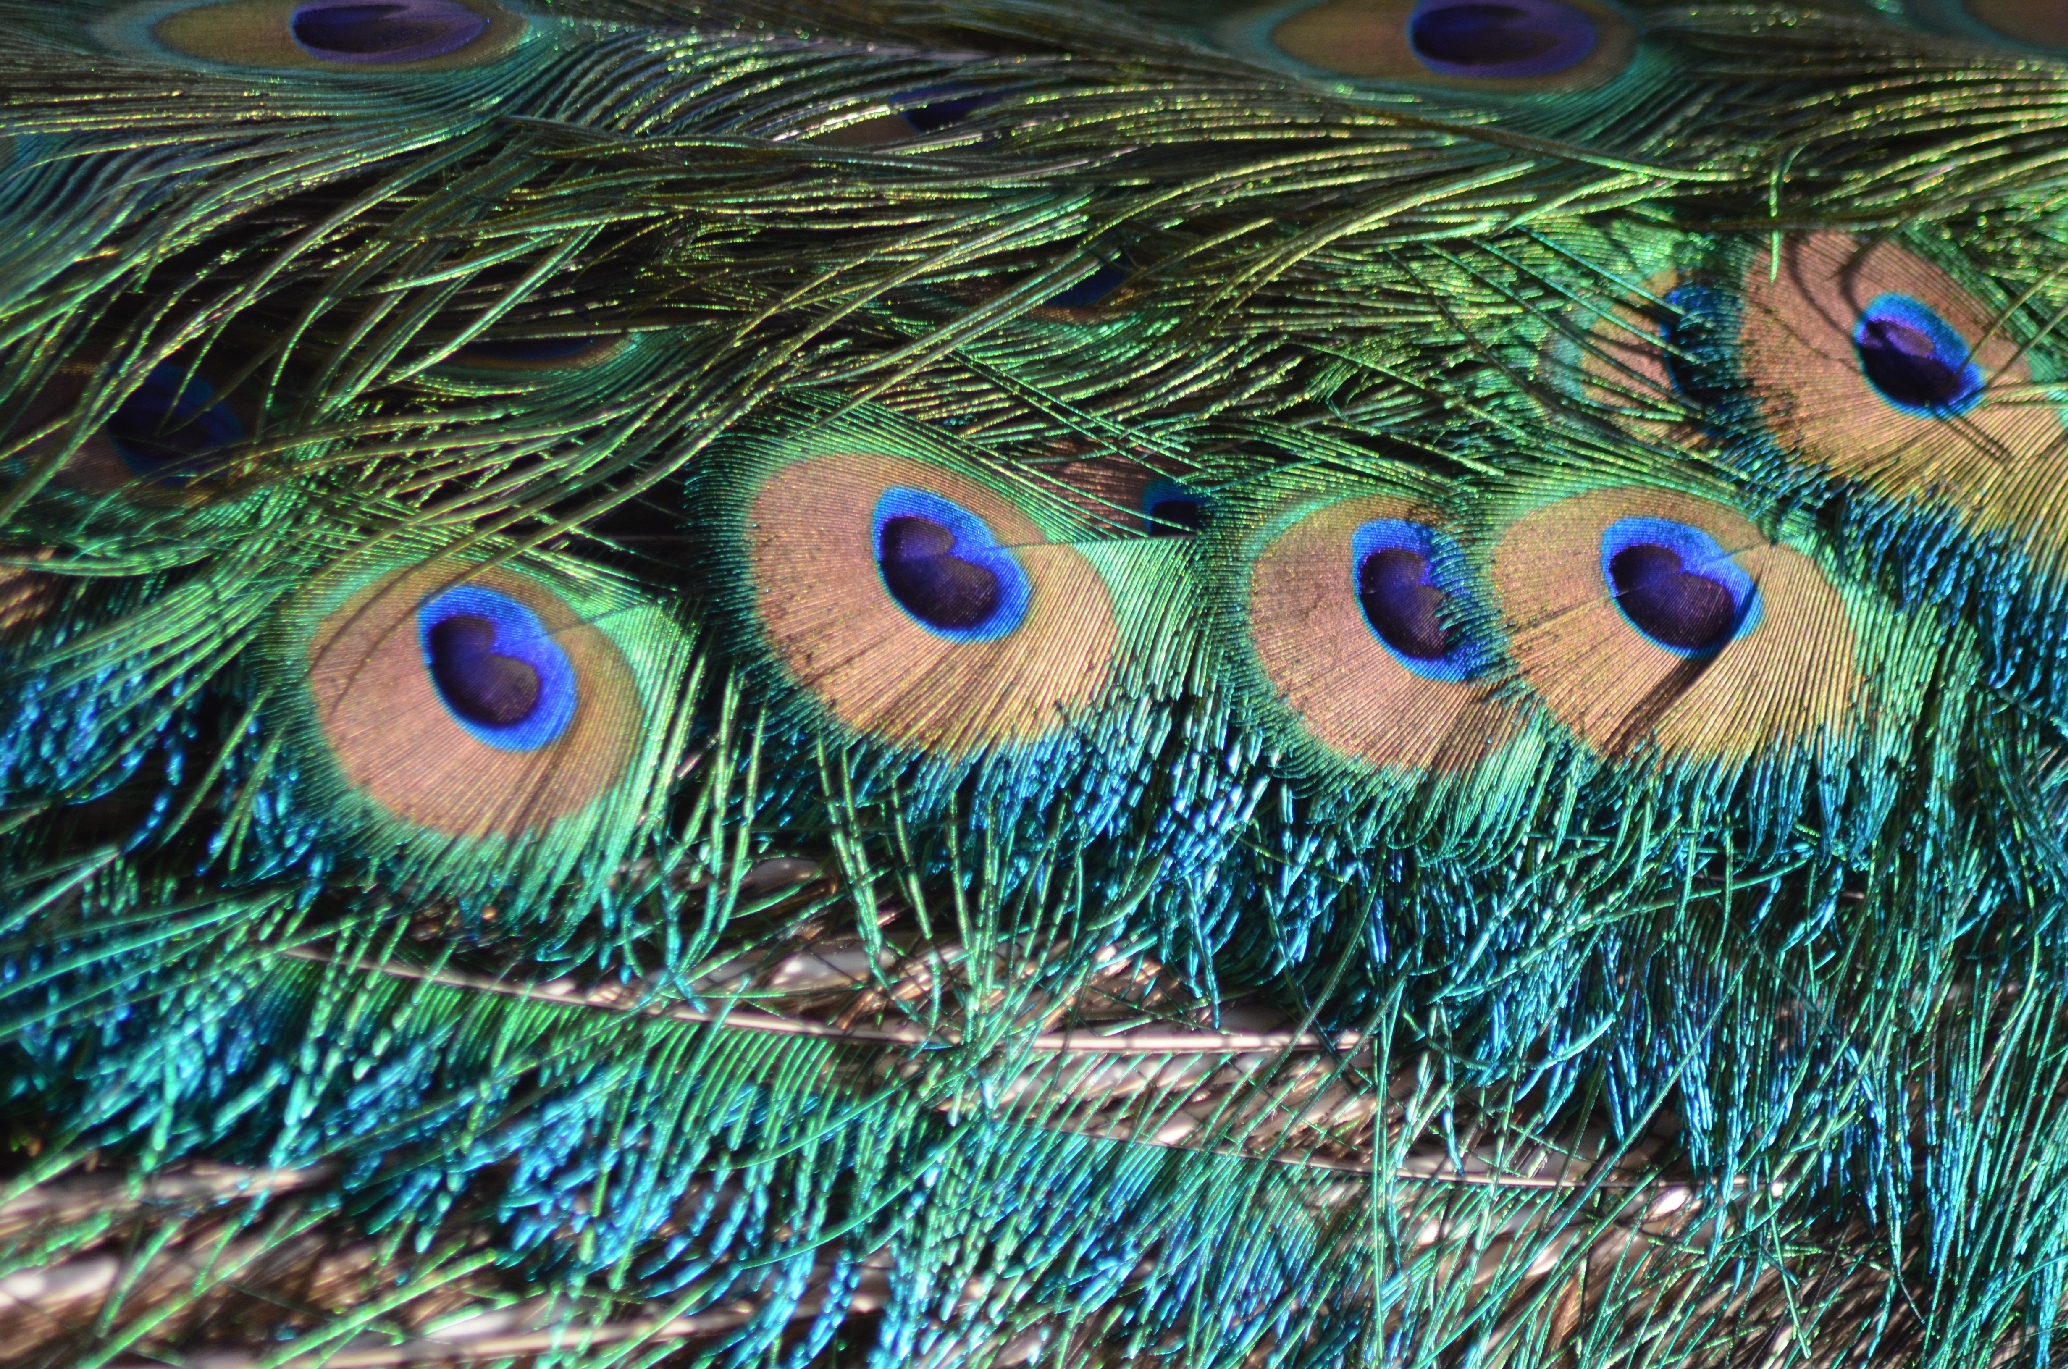 My favorite peacock's feathers